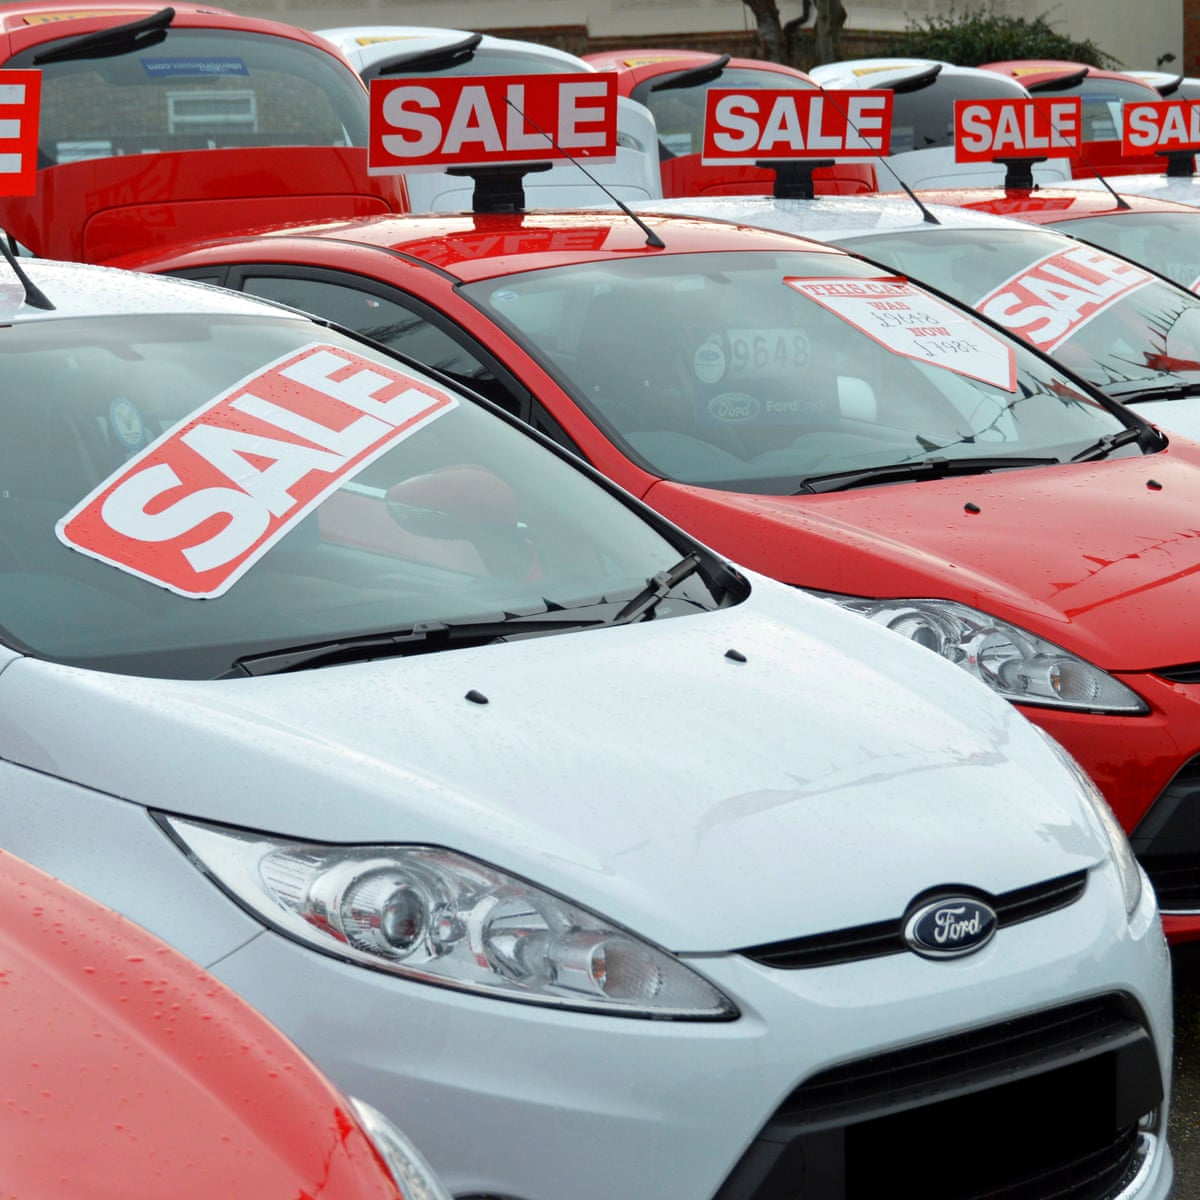 Drive Off With A Secondhand Car For Less Motoring The Guardian